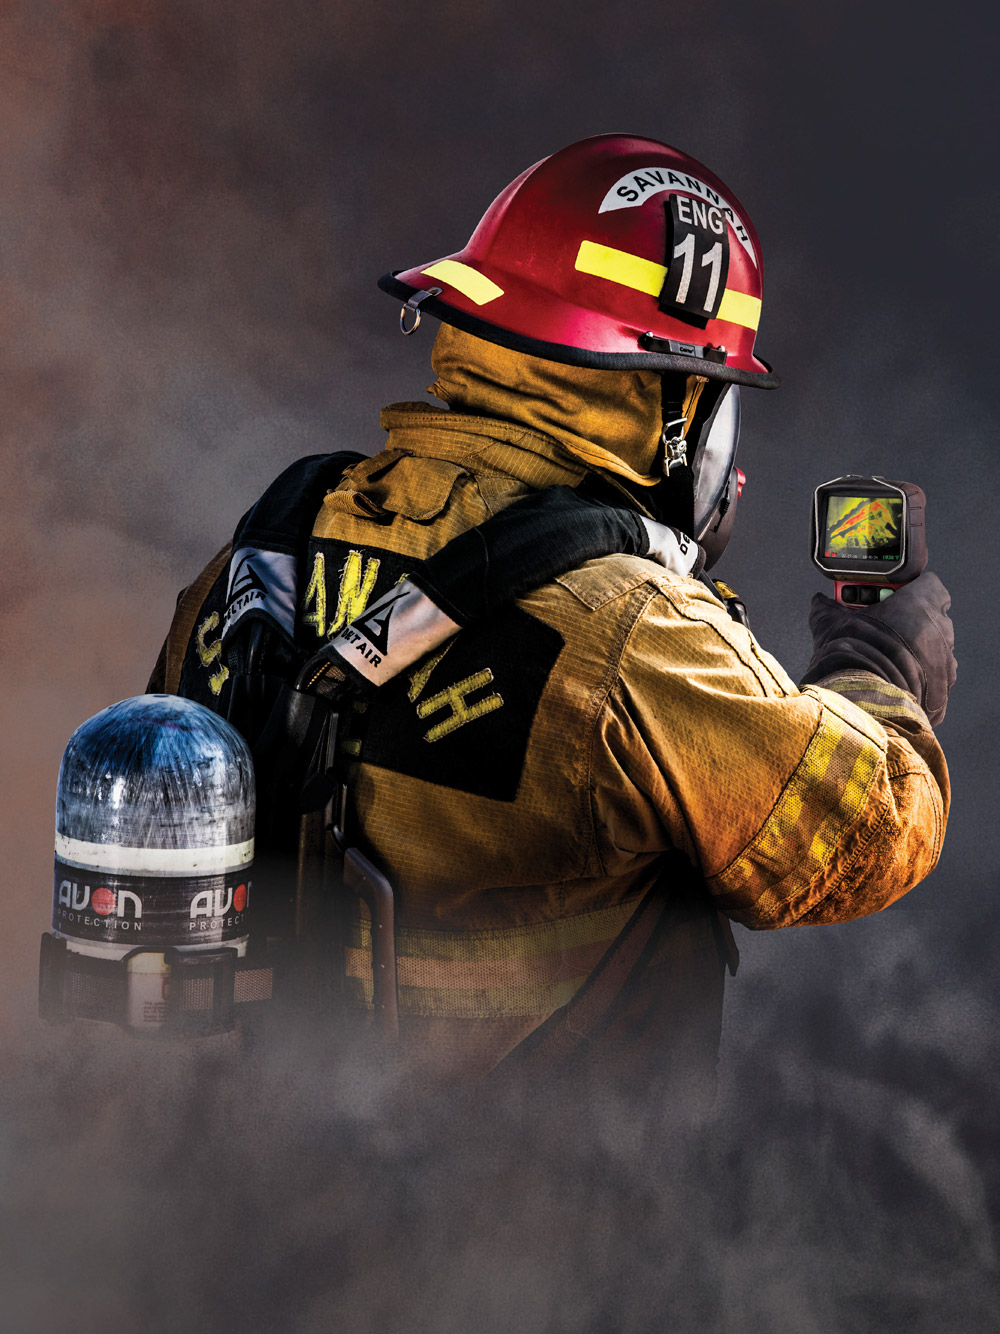 Firefighter gear & equipment, fire fighting equipment & supplies, fire and rescue equipment & services, police gear & equipment